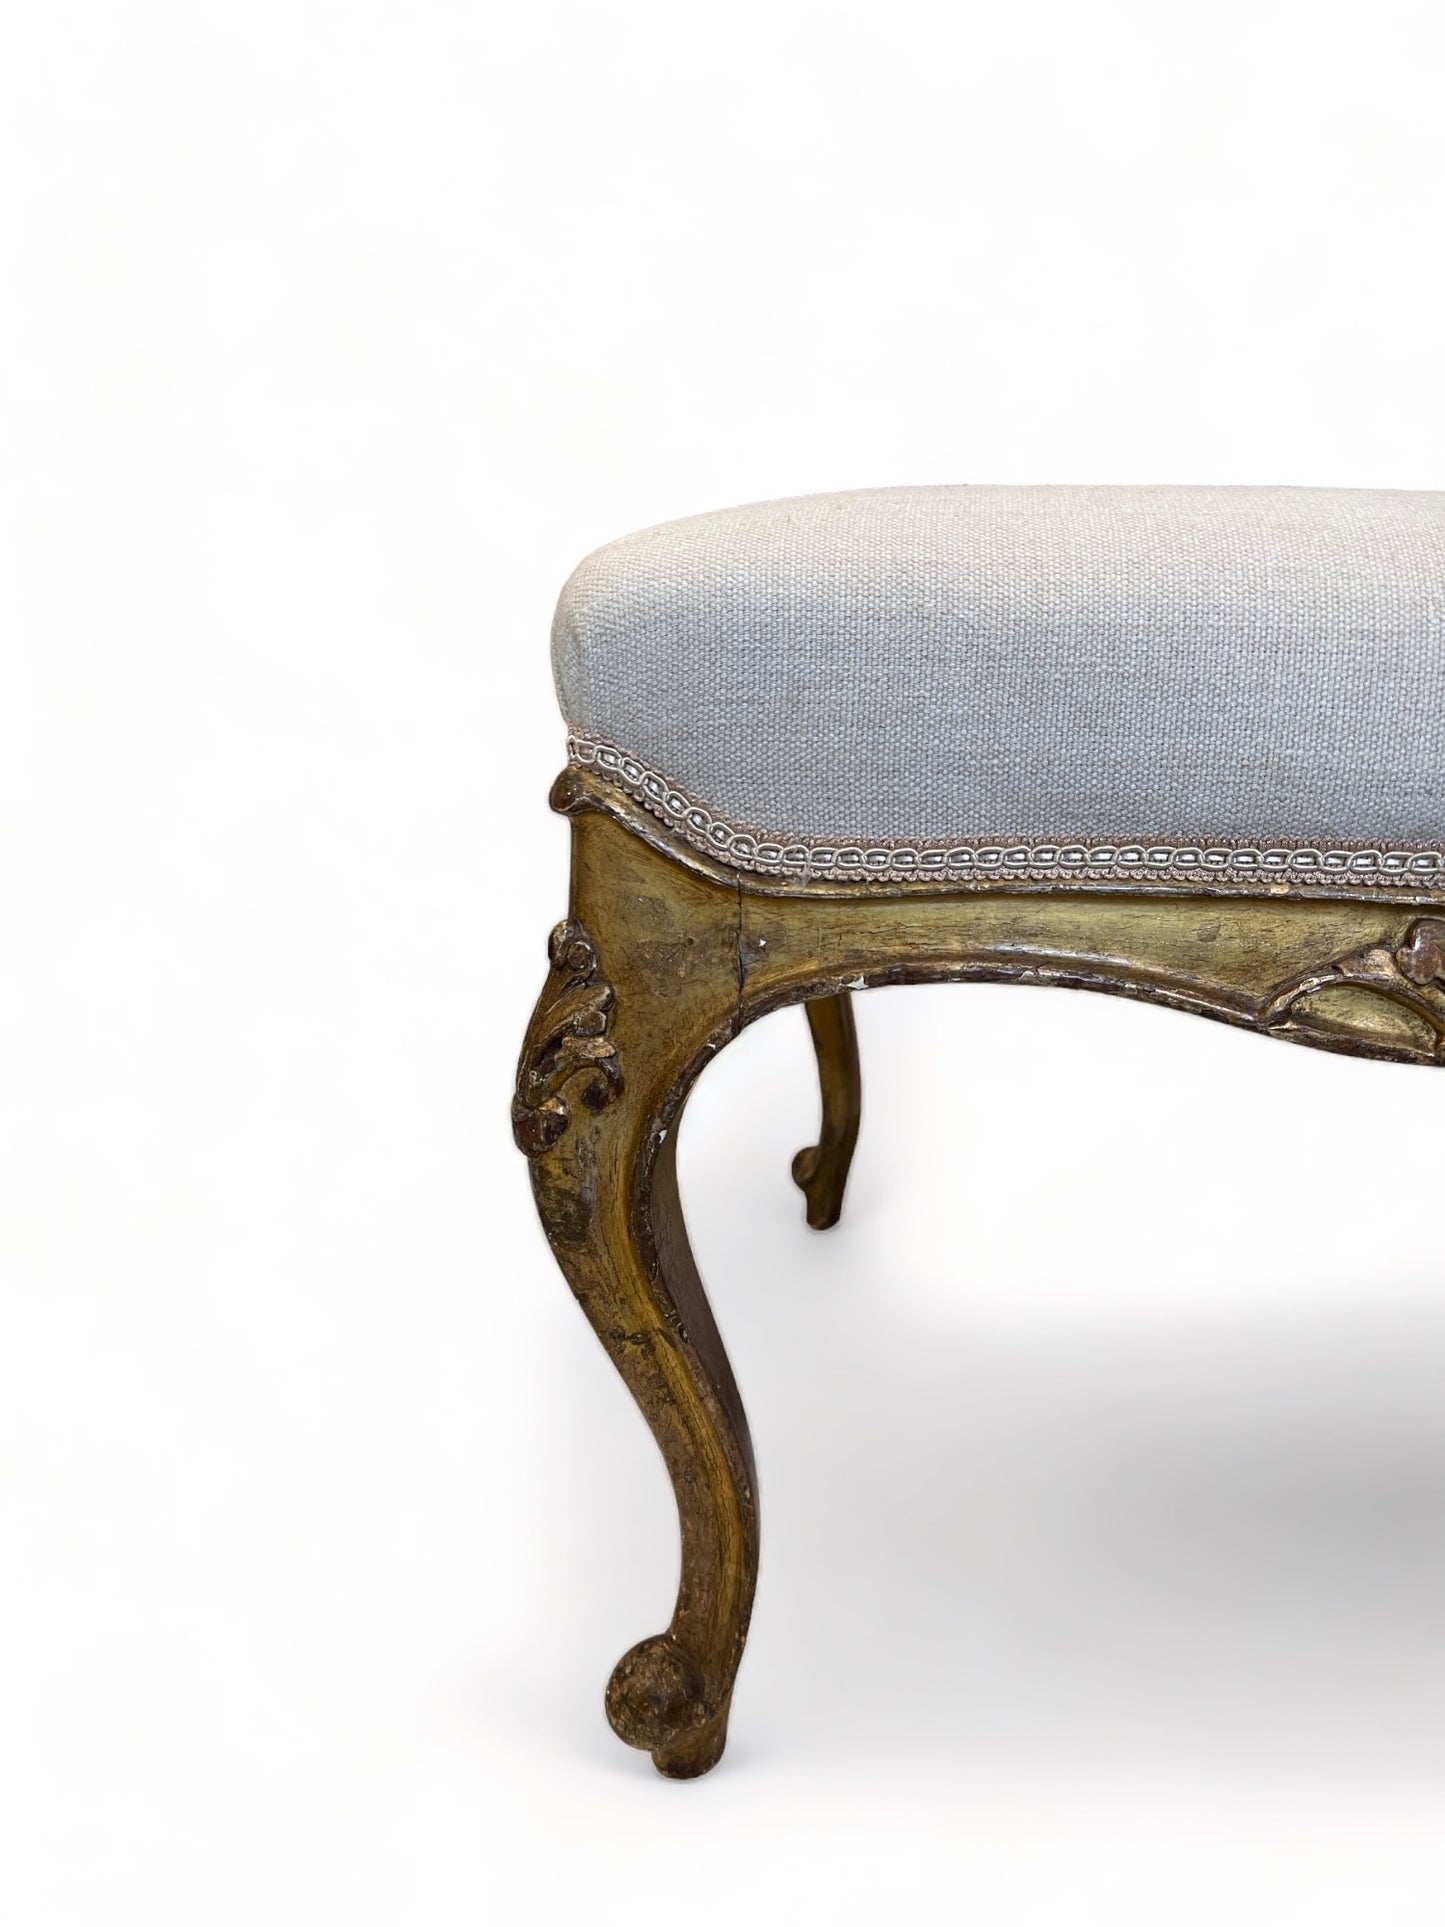 19th Century Gilt Victorian Carved Footstool